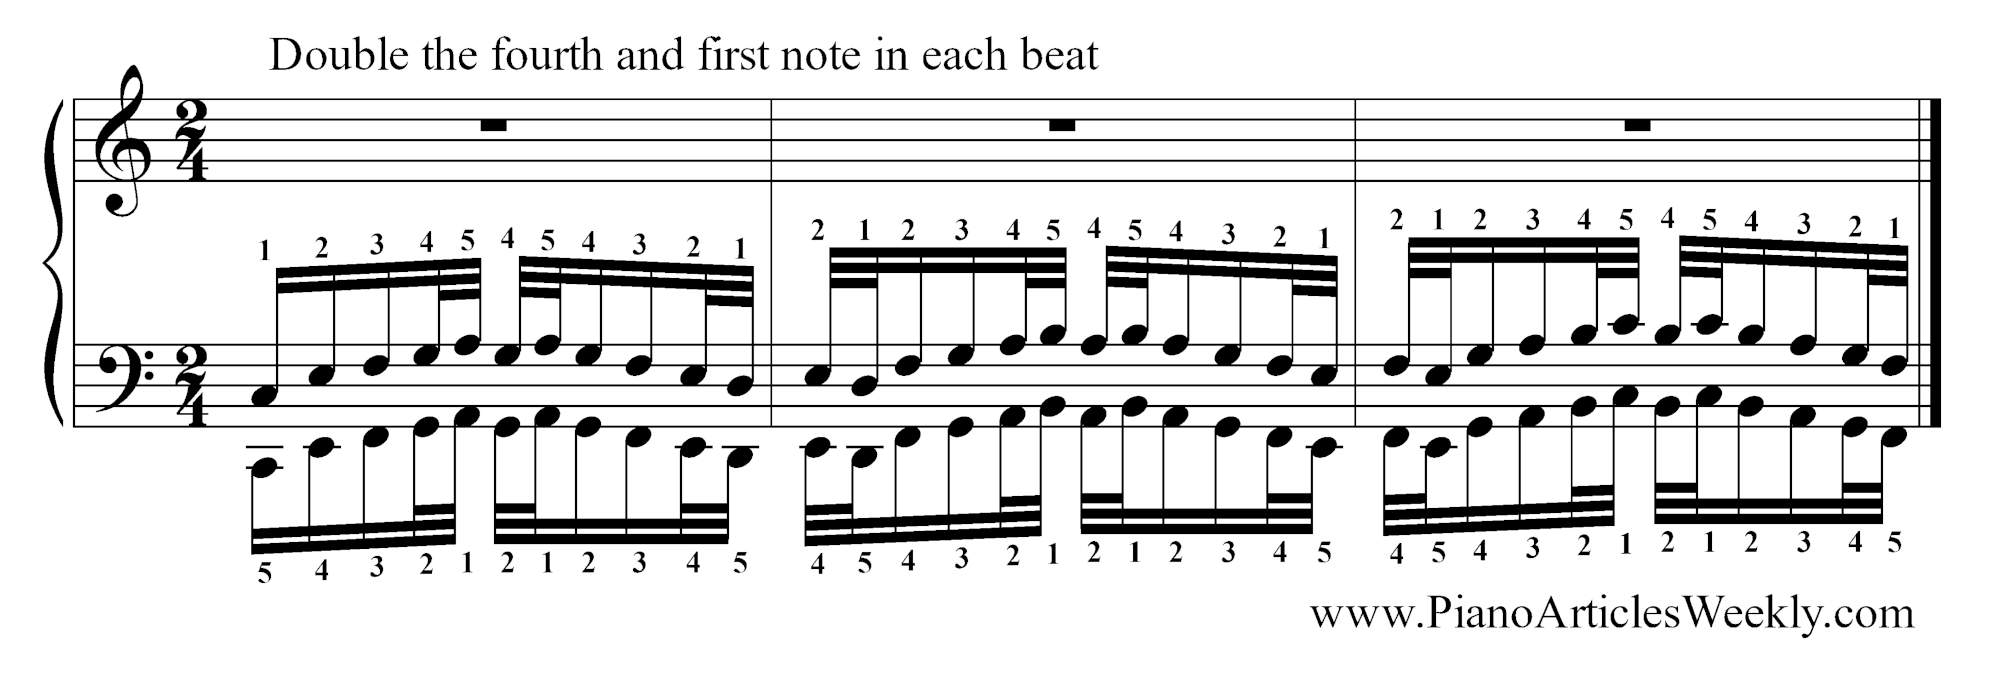 Hanon-Exercise-double-first-and-fourth-semiquaver_sixteenth-note-in-each-beat